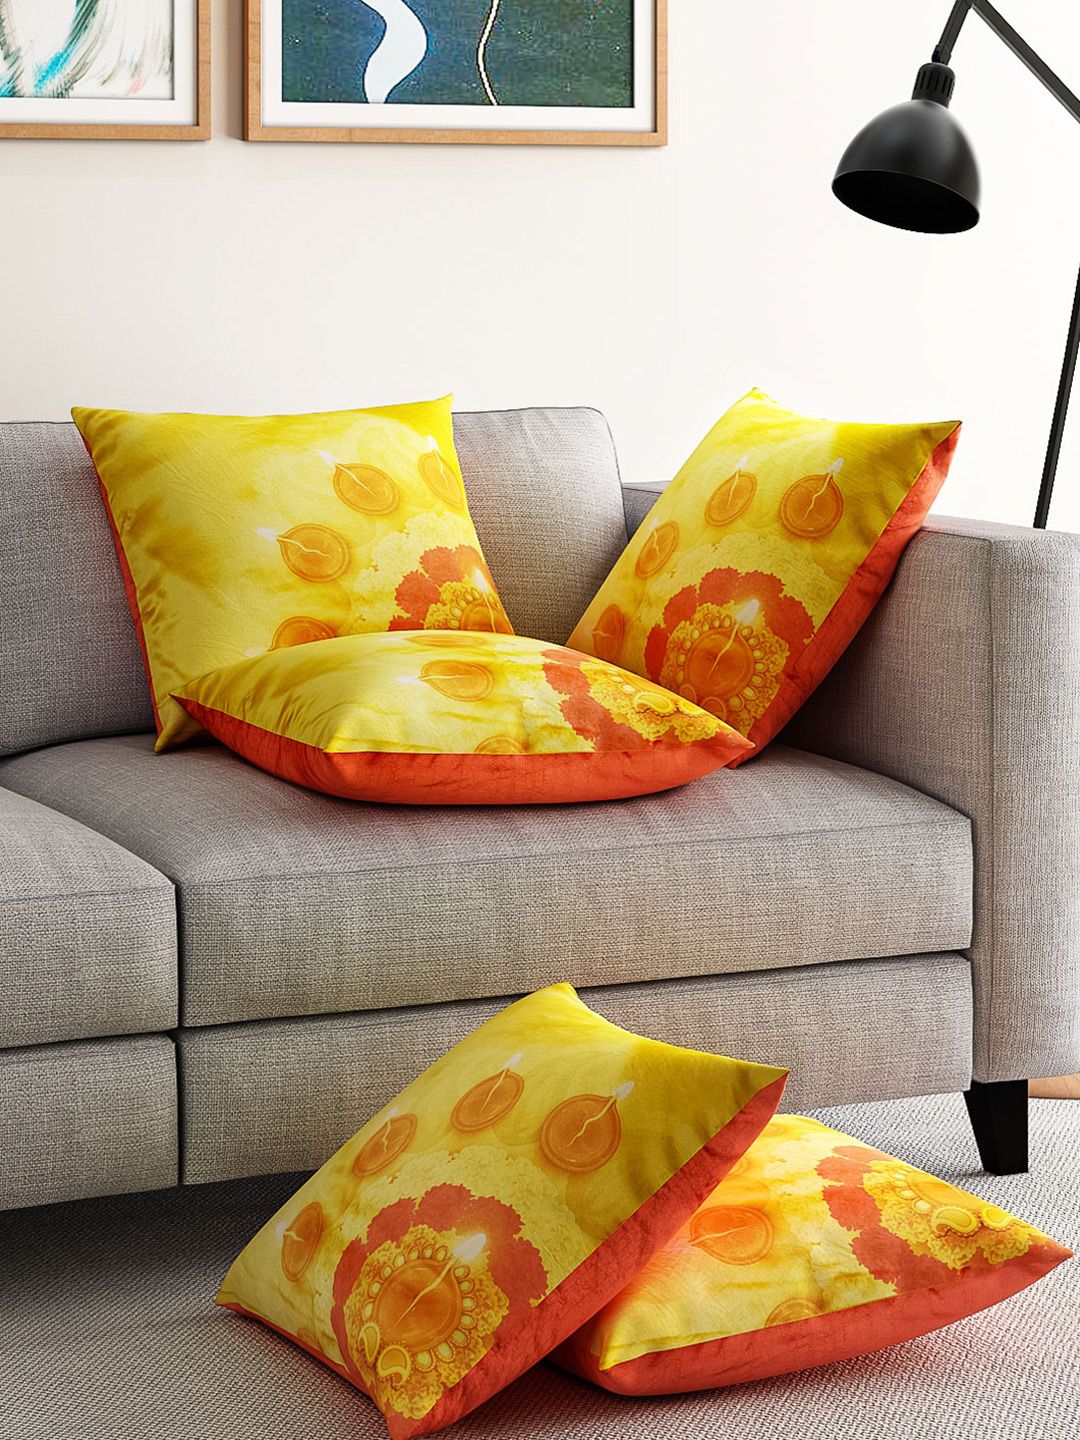 Alina decor Yellow Set of 5 Printed 16"x16" Square Cushion Covers Price in India